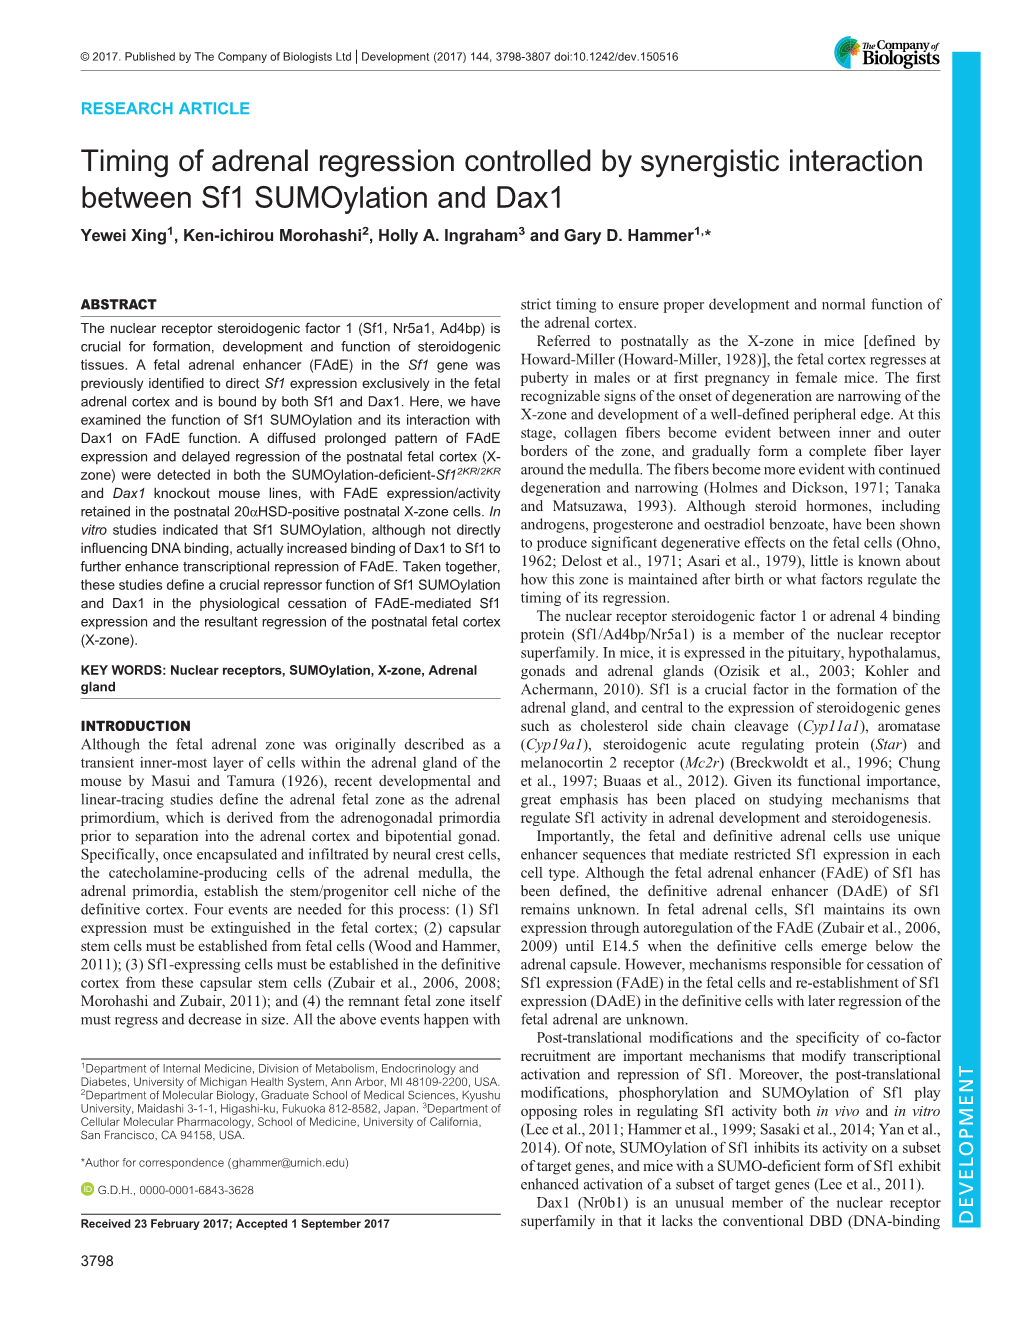 Timing of Adrenal Regression Controlled by Synergistic Interaction Between Sf1 Sumoylation and Dax1 Yewei Xing1, Ken-Ichirou Morohashi2, Holly A